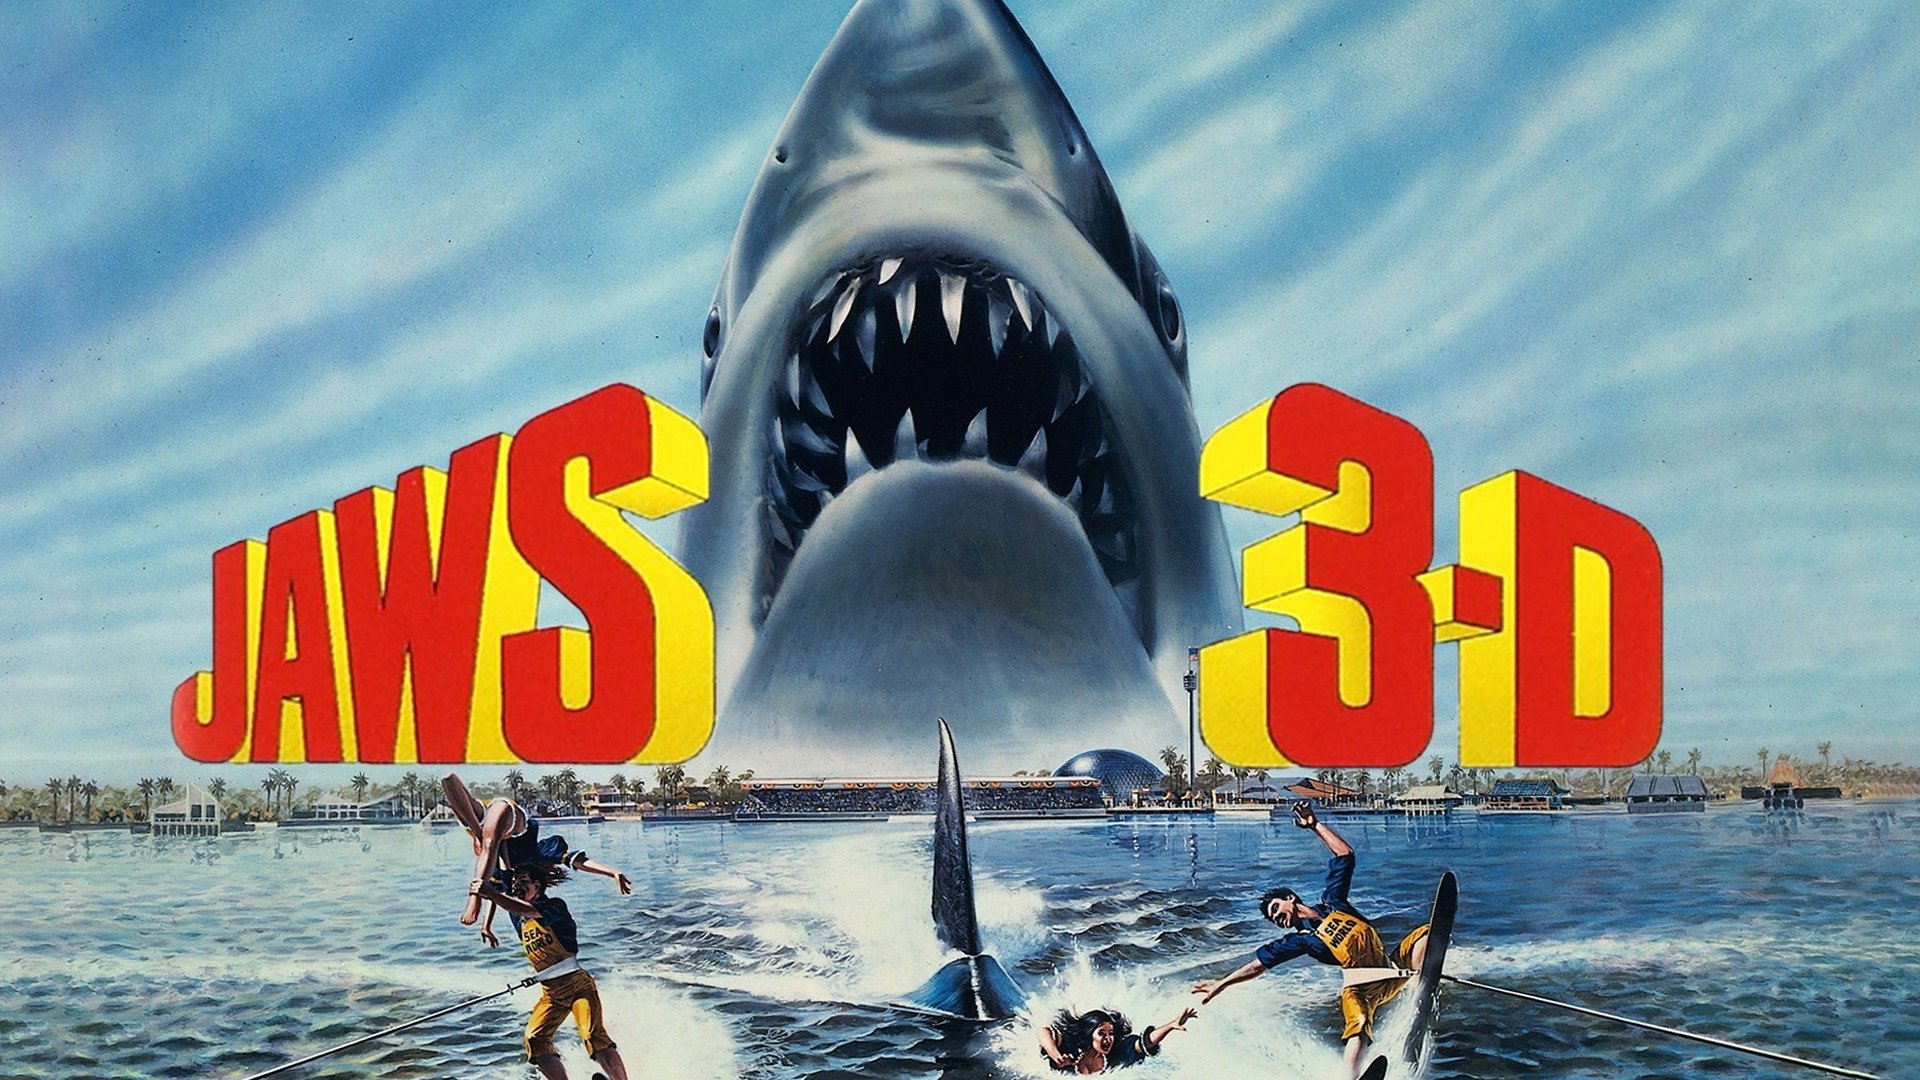 WATCH JAWS WHILE HOUSTON SYMPHONY PERFORMS BLOCKBUSTER'S SCORE JUNE 13 AT  THE PAVILION